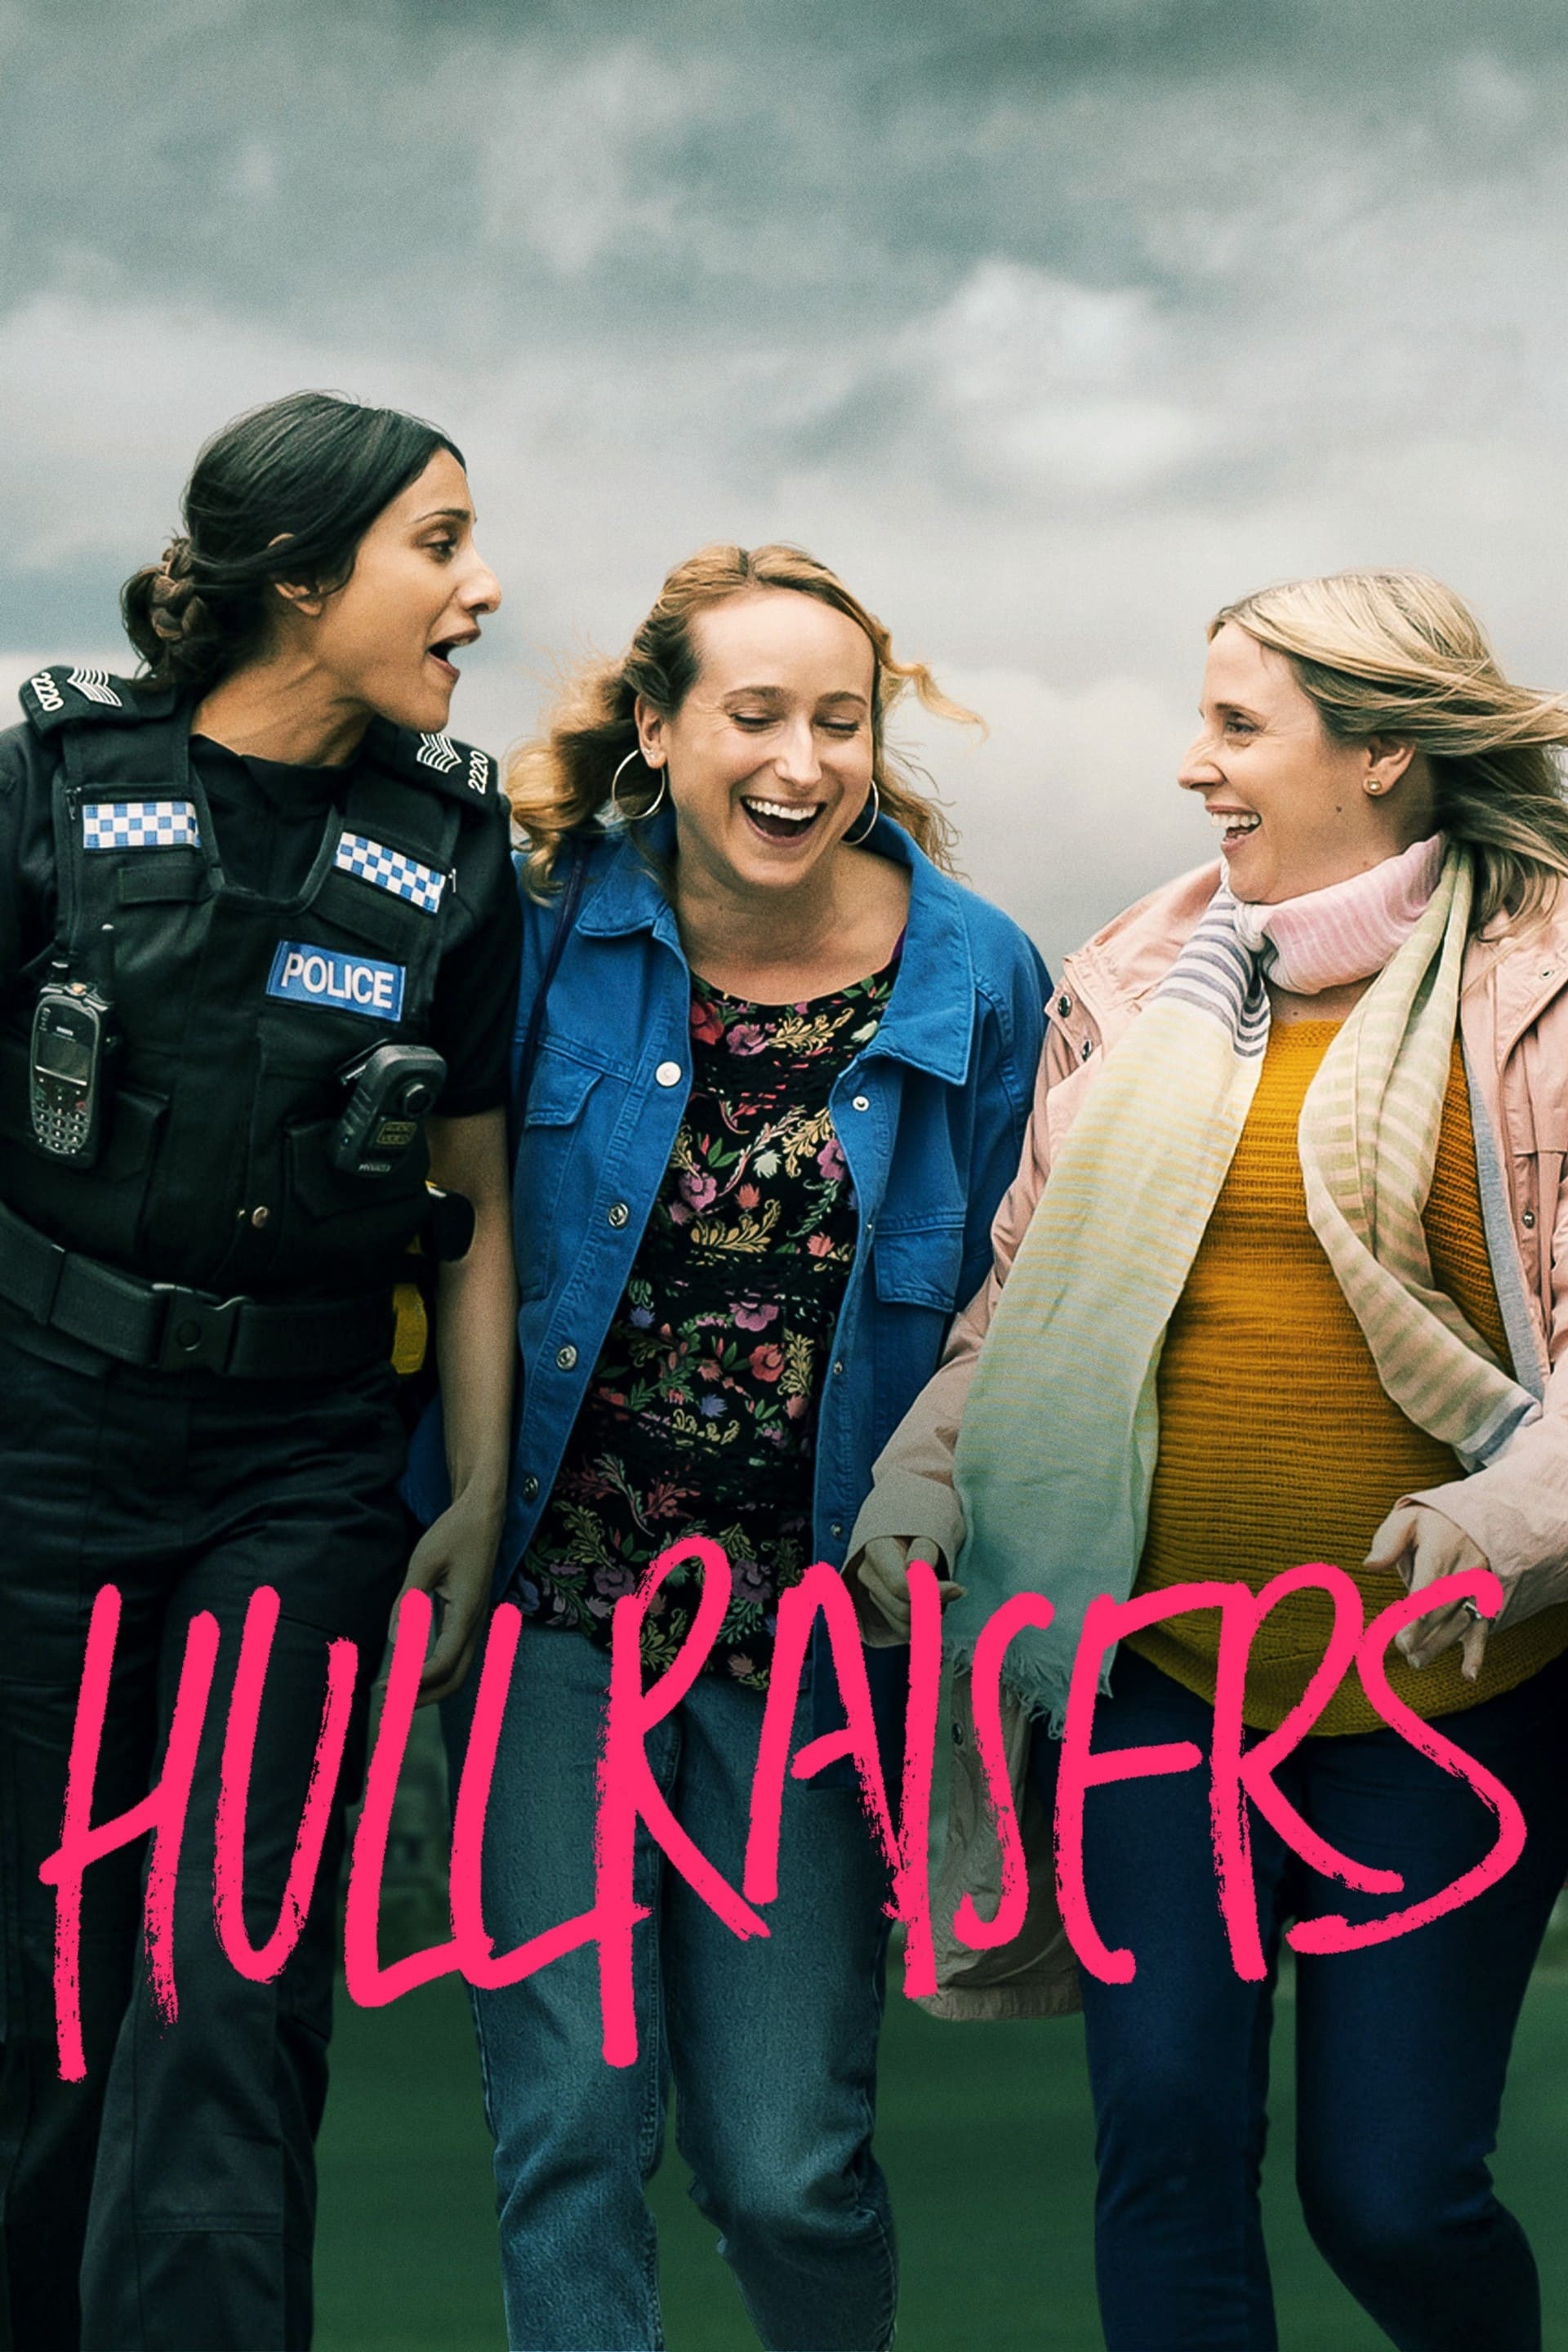 Hullraisers TV Shows About England